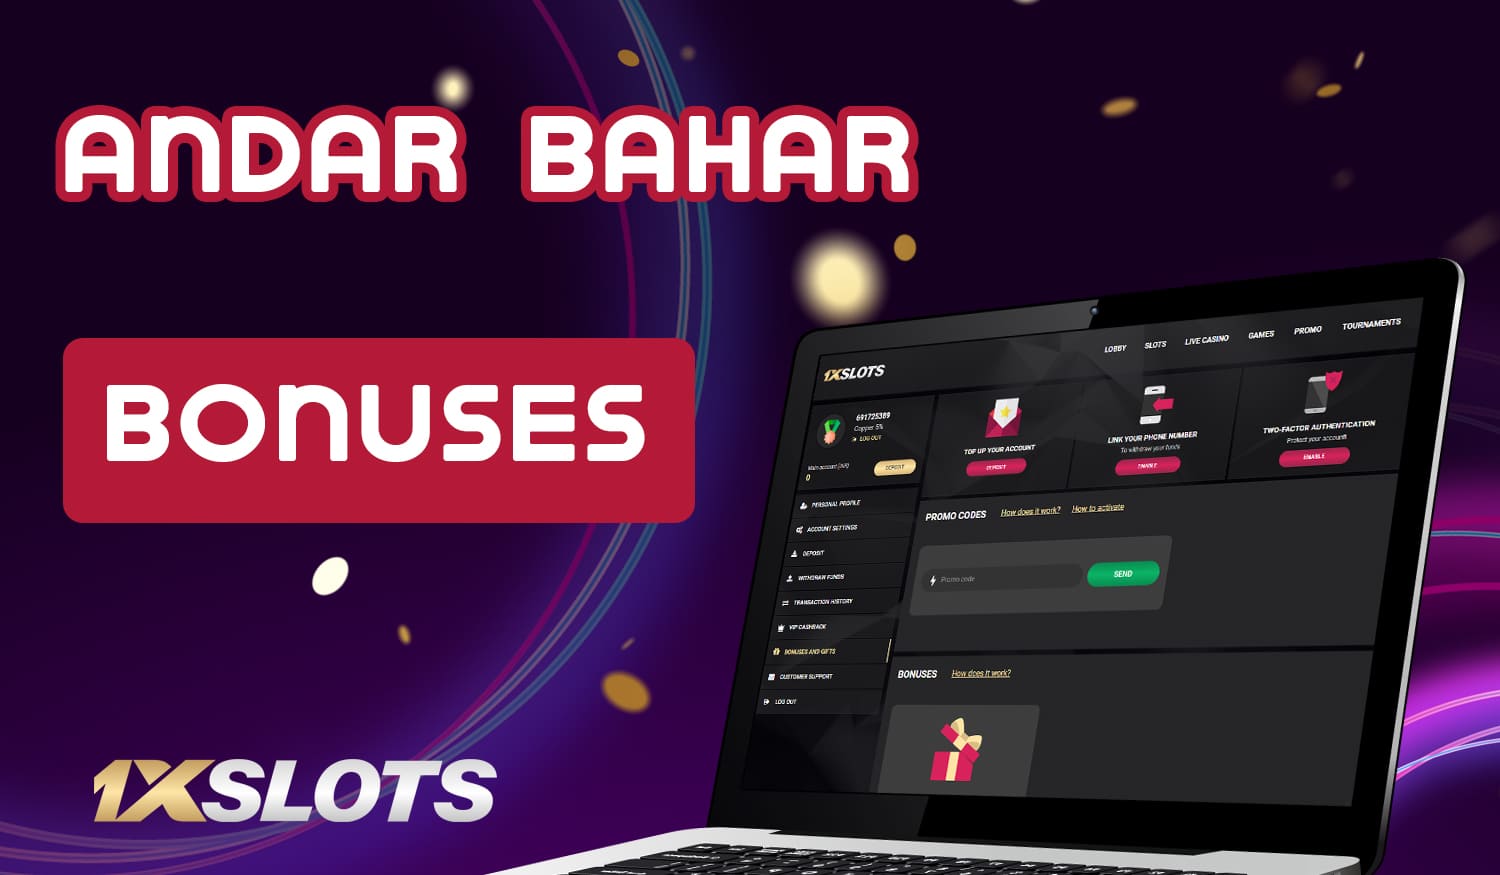 List of bonuses available at 1Xslots online casino site for Andar Bahar players